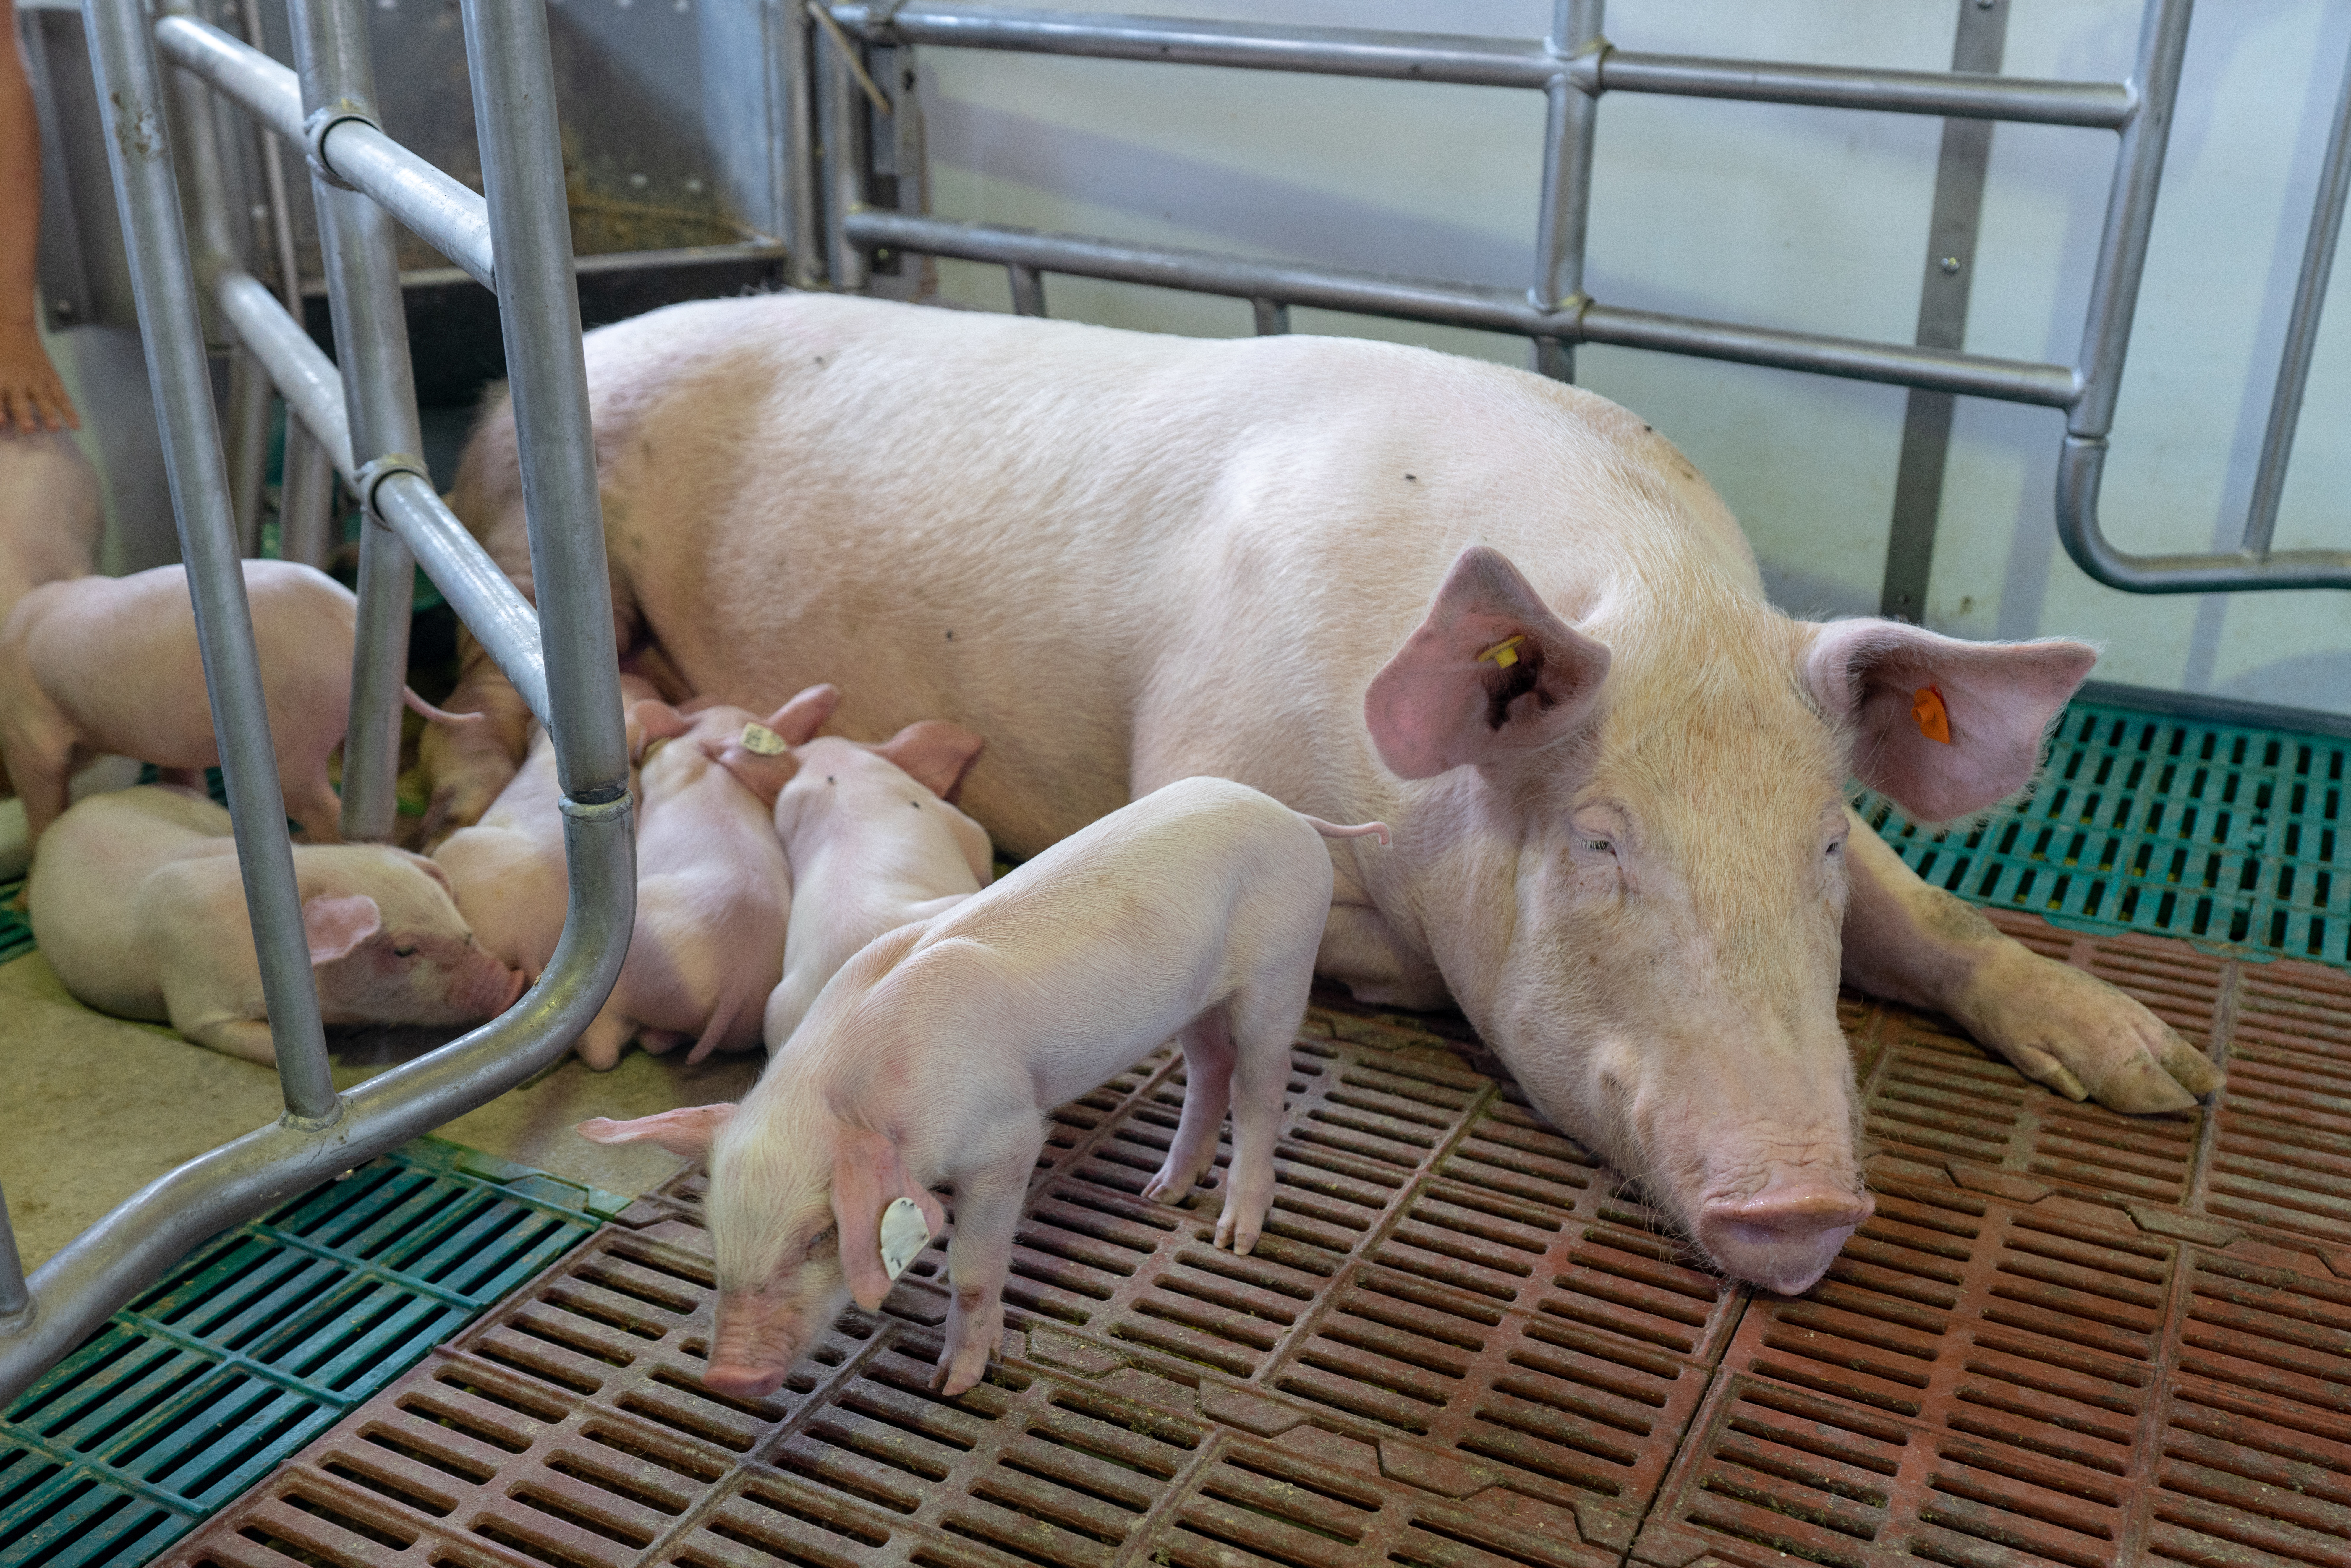 sow and piglets in an open farrowing system